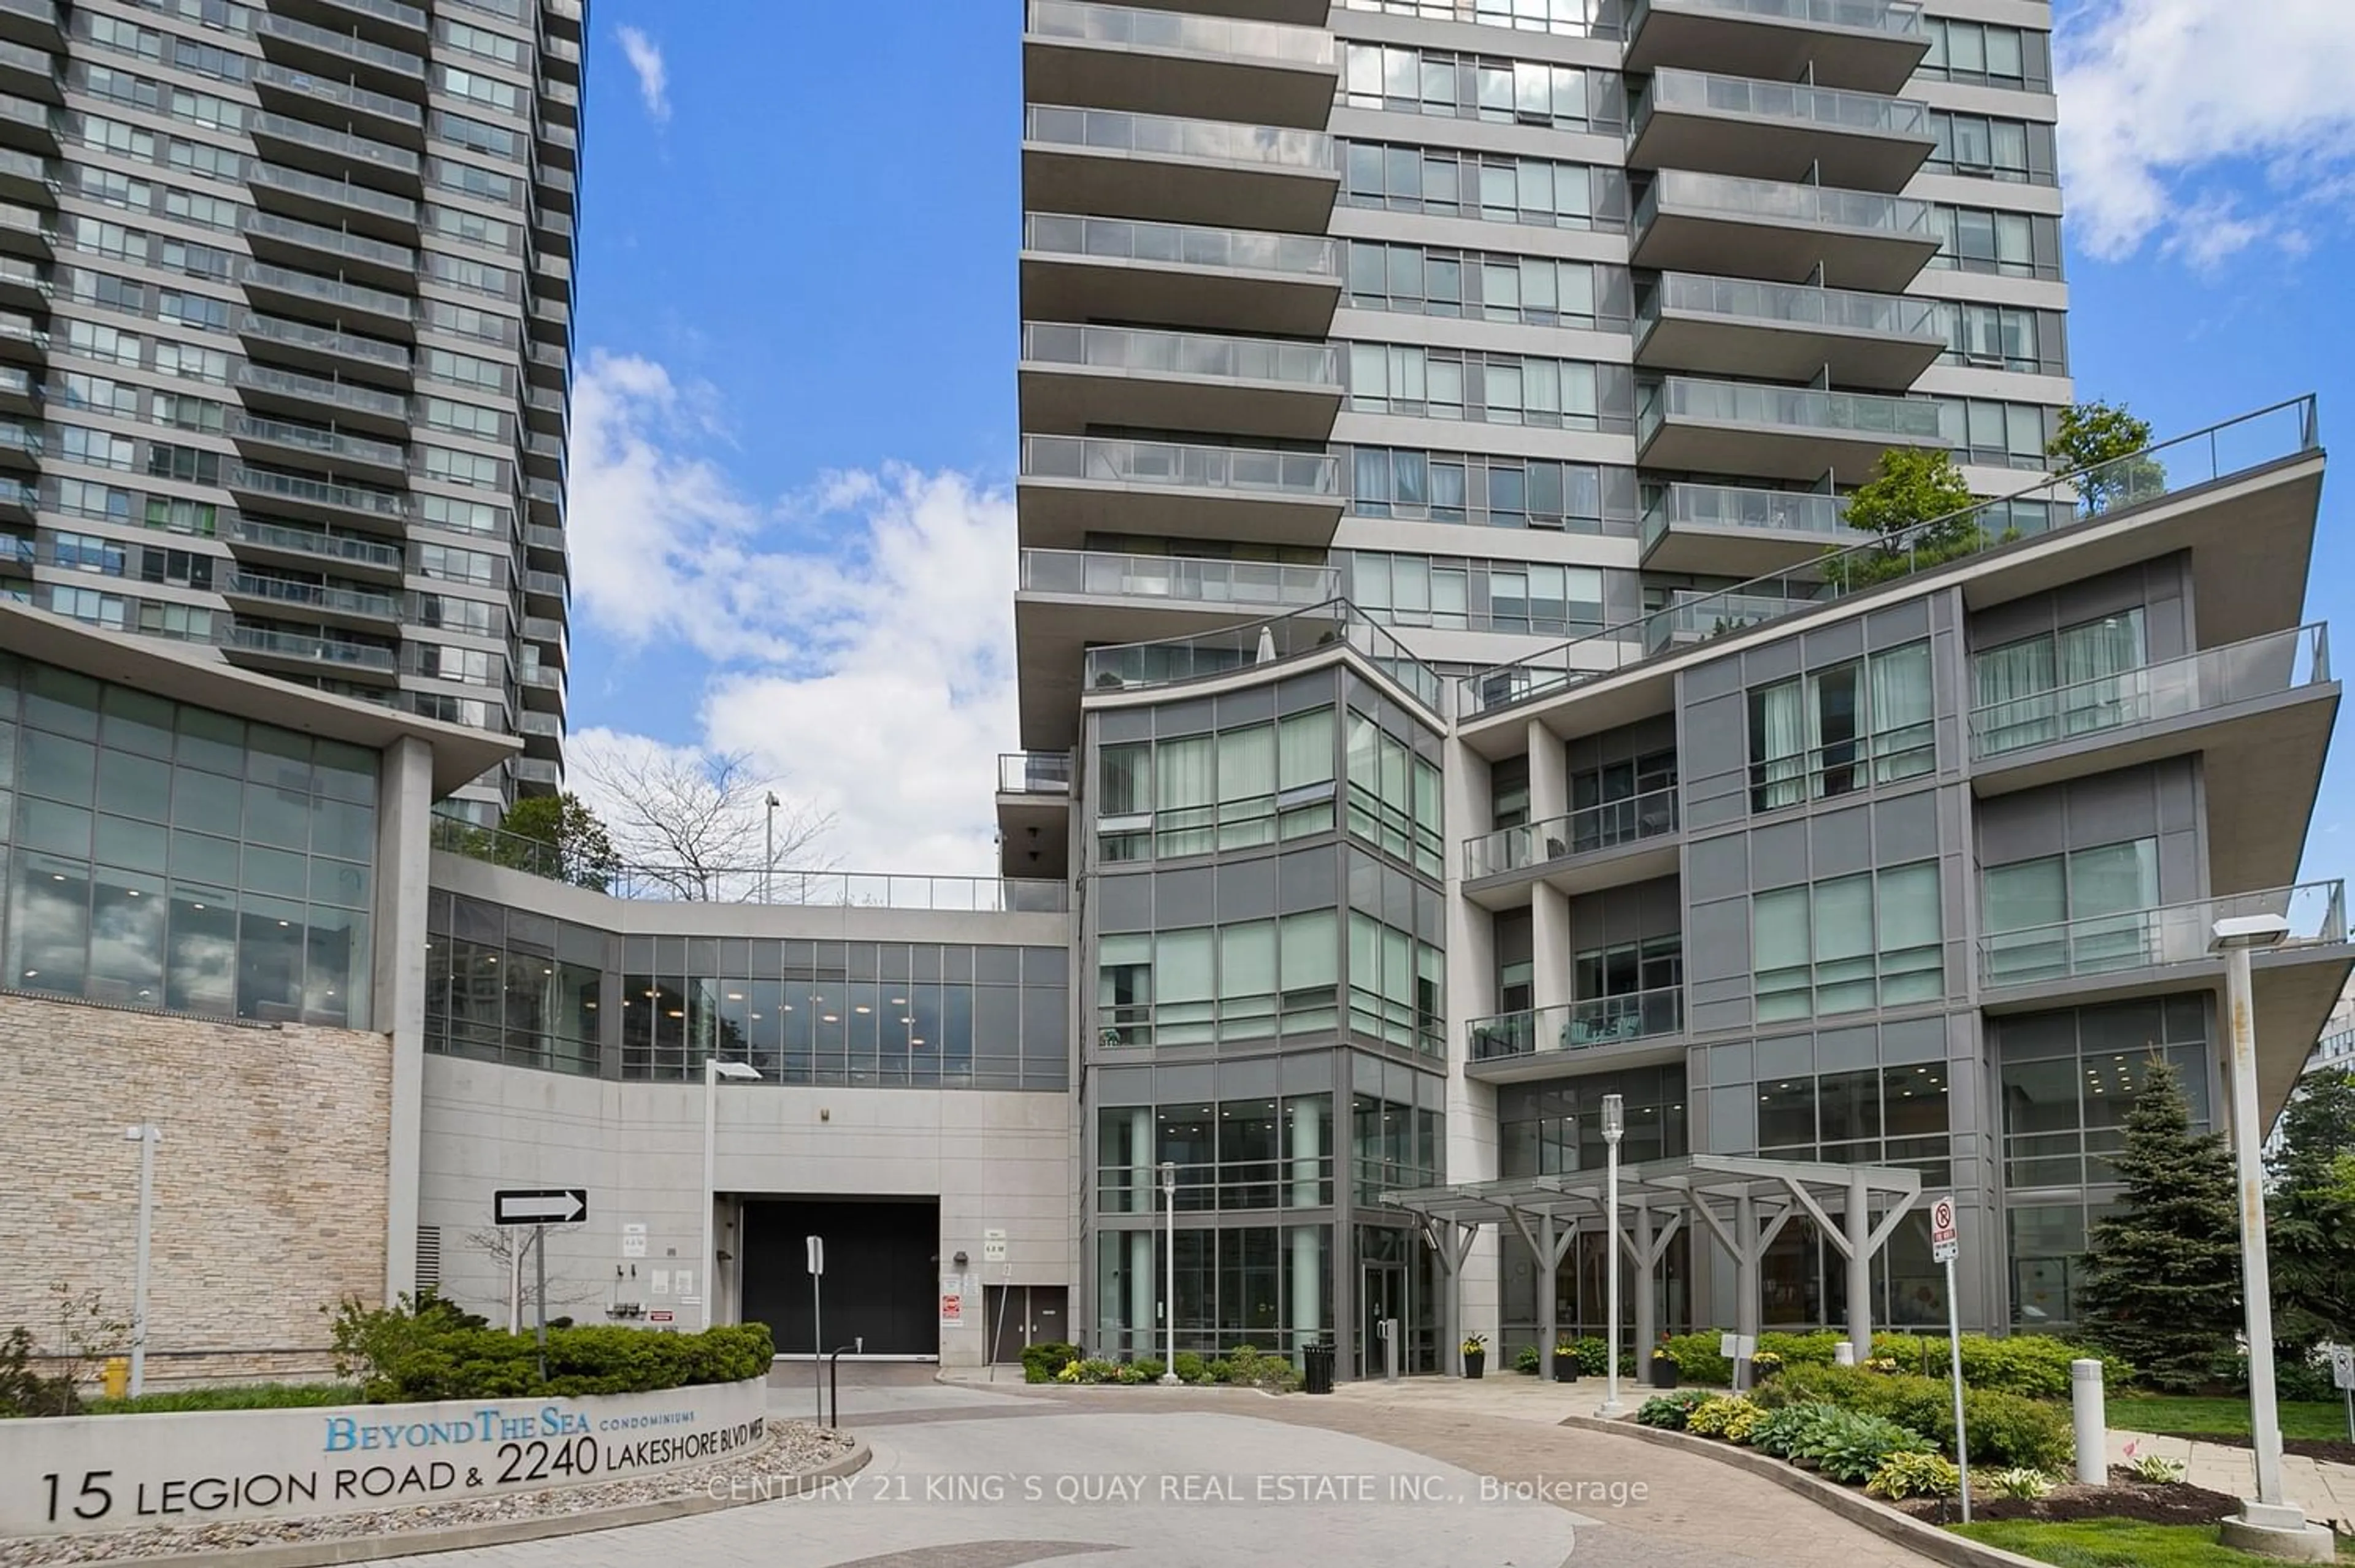 A pic from exterior of the house or condo for 2240 Lake Shore Blvd #2904, Toronto Ontario M8V 0A9